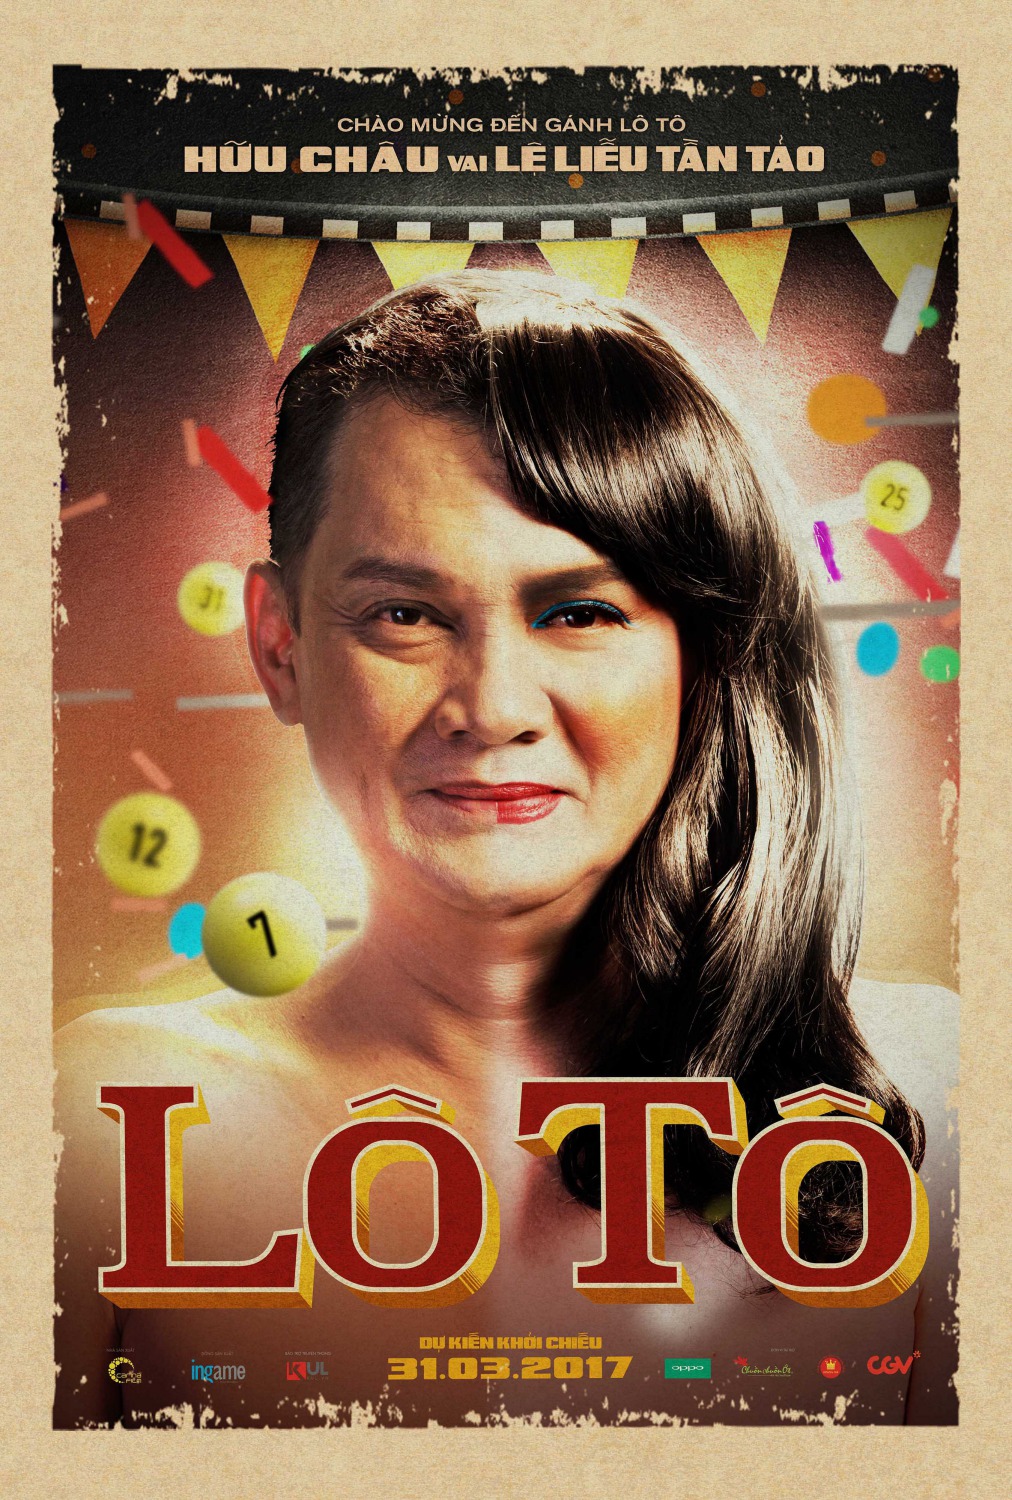 Extra Large Movie Poster Image for Lô tô (#1 of 5)